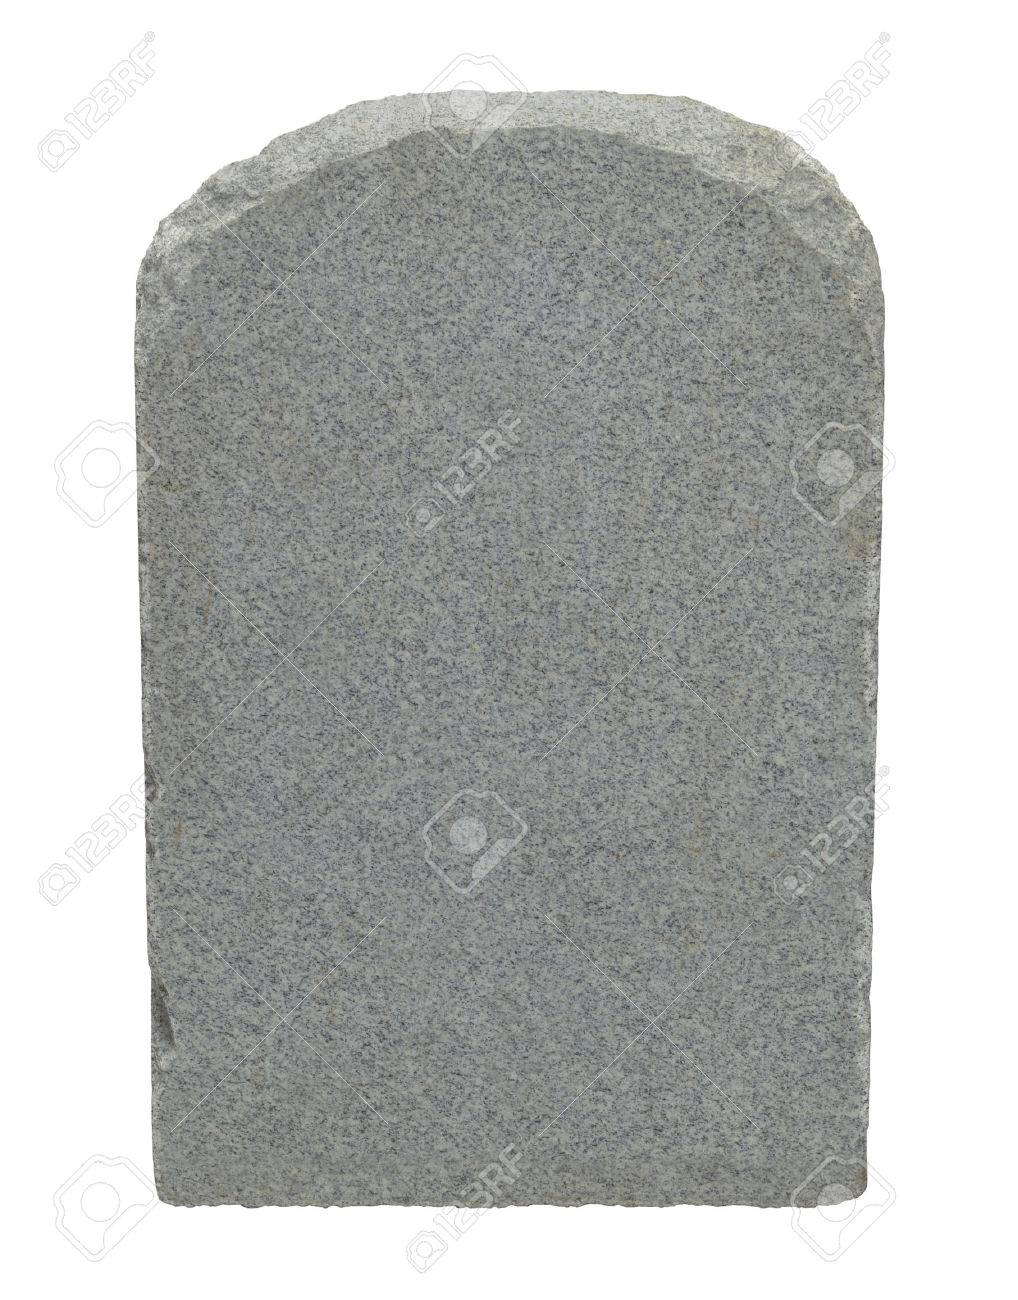 Tombstone With Copy Space Isolated On White Background Stock